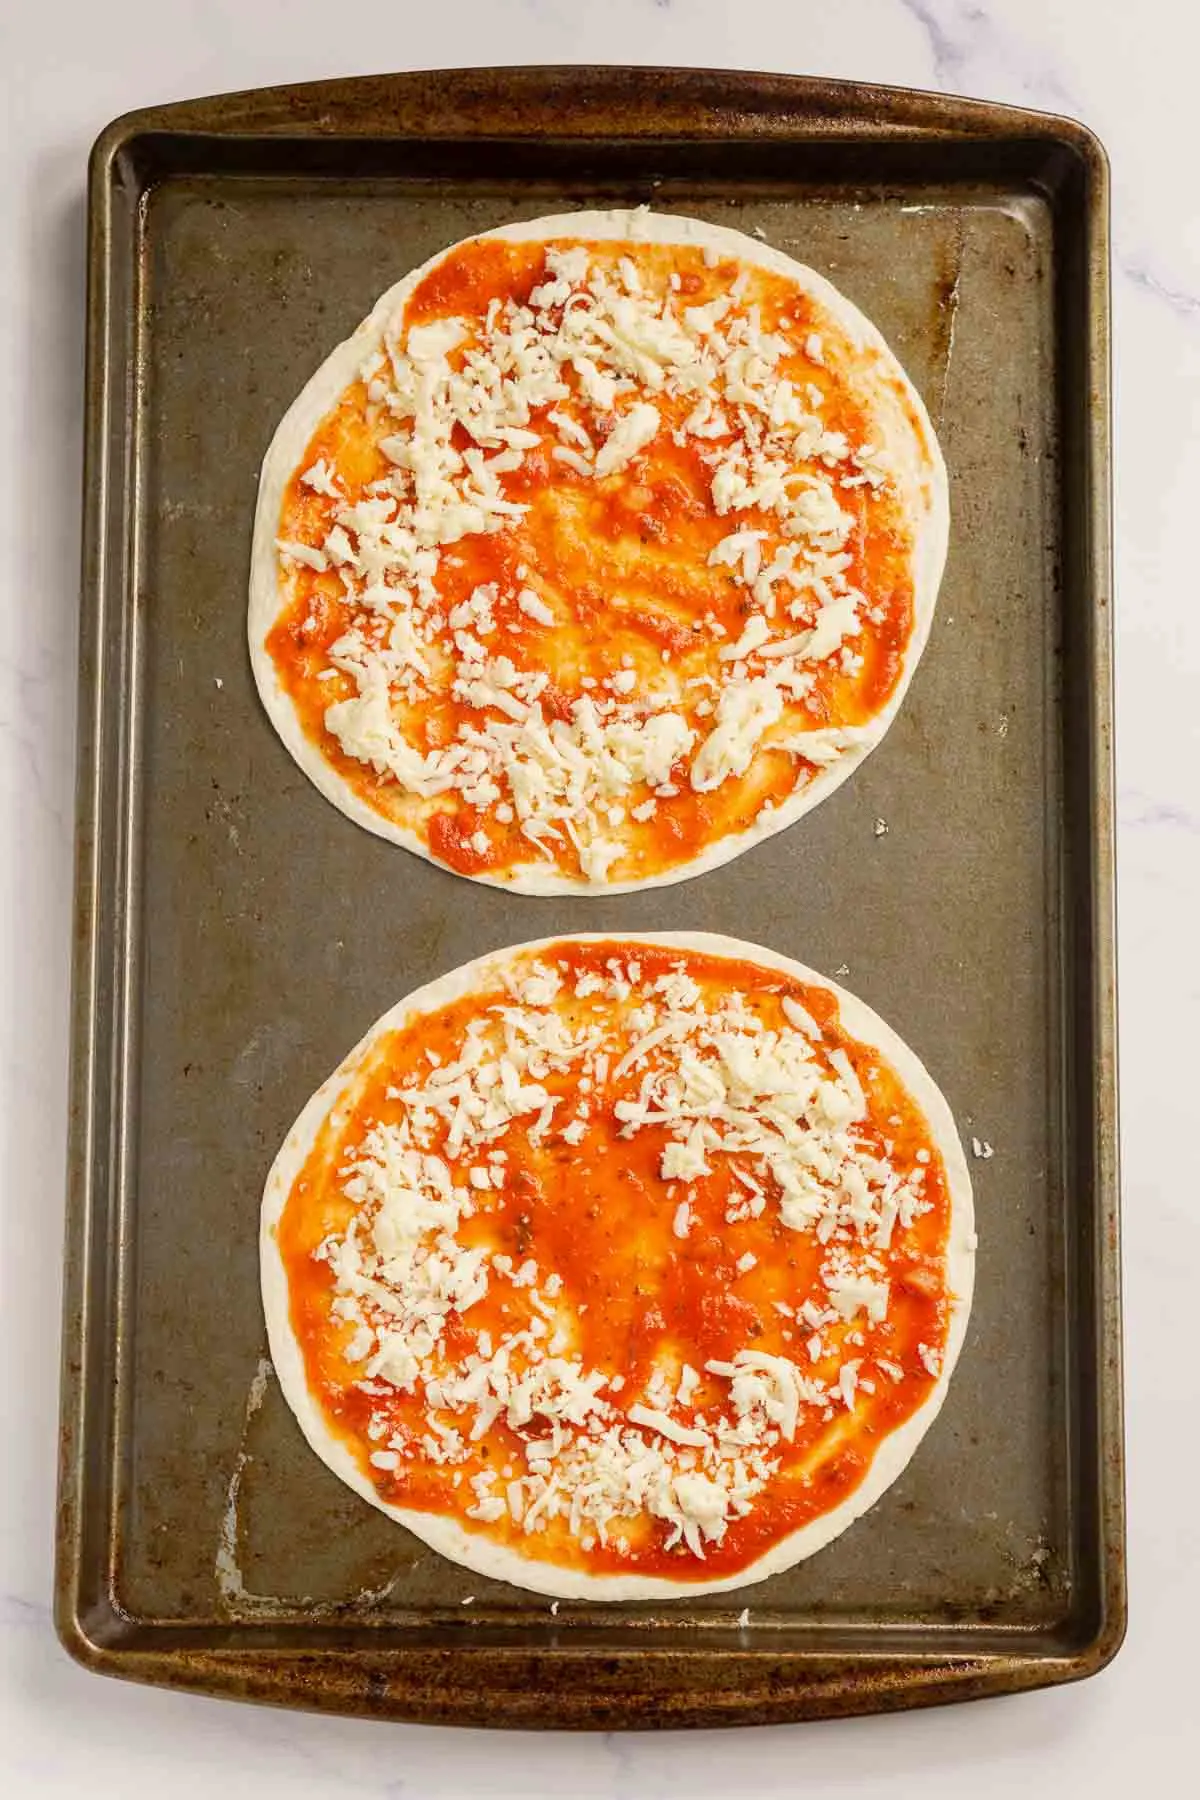 Shredded cheese sprinkled on a tortilla with pizza sauce